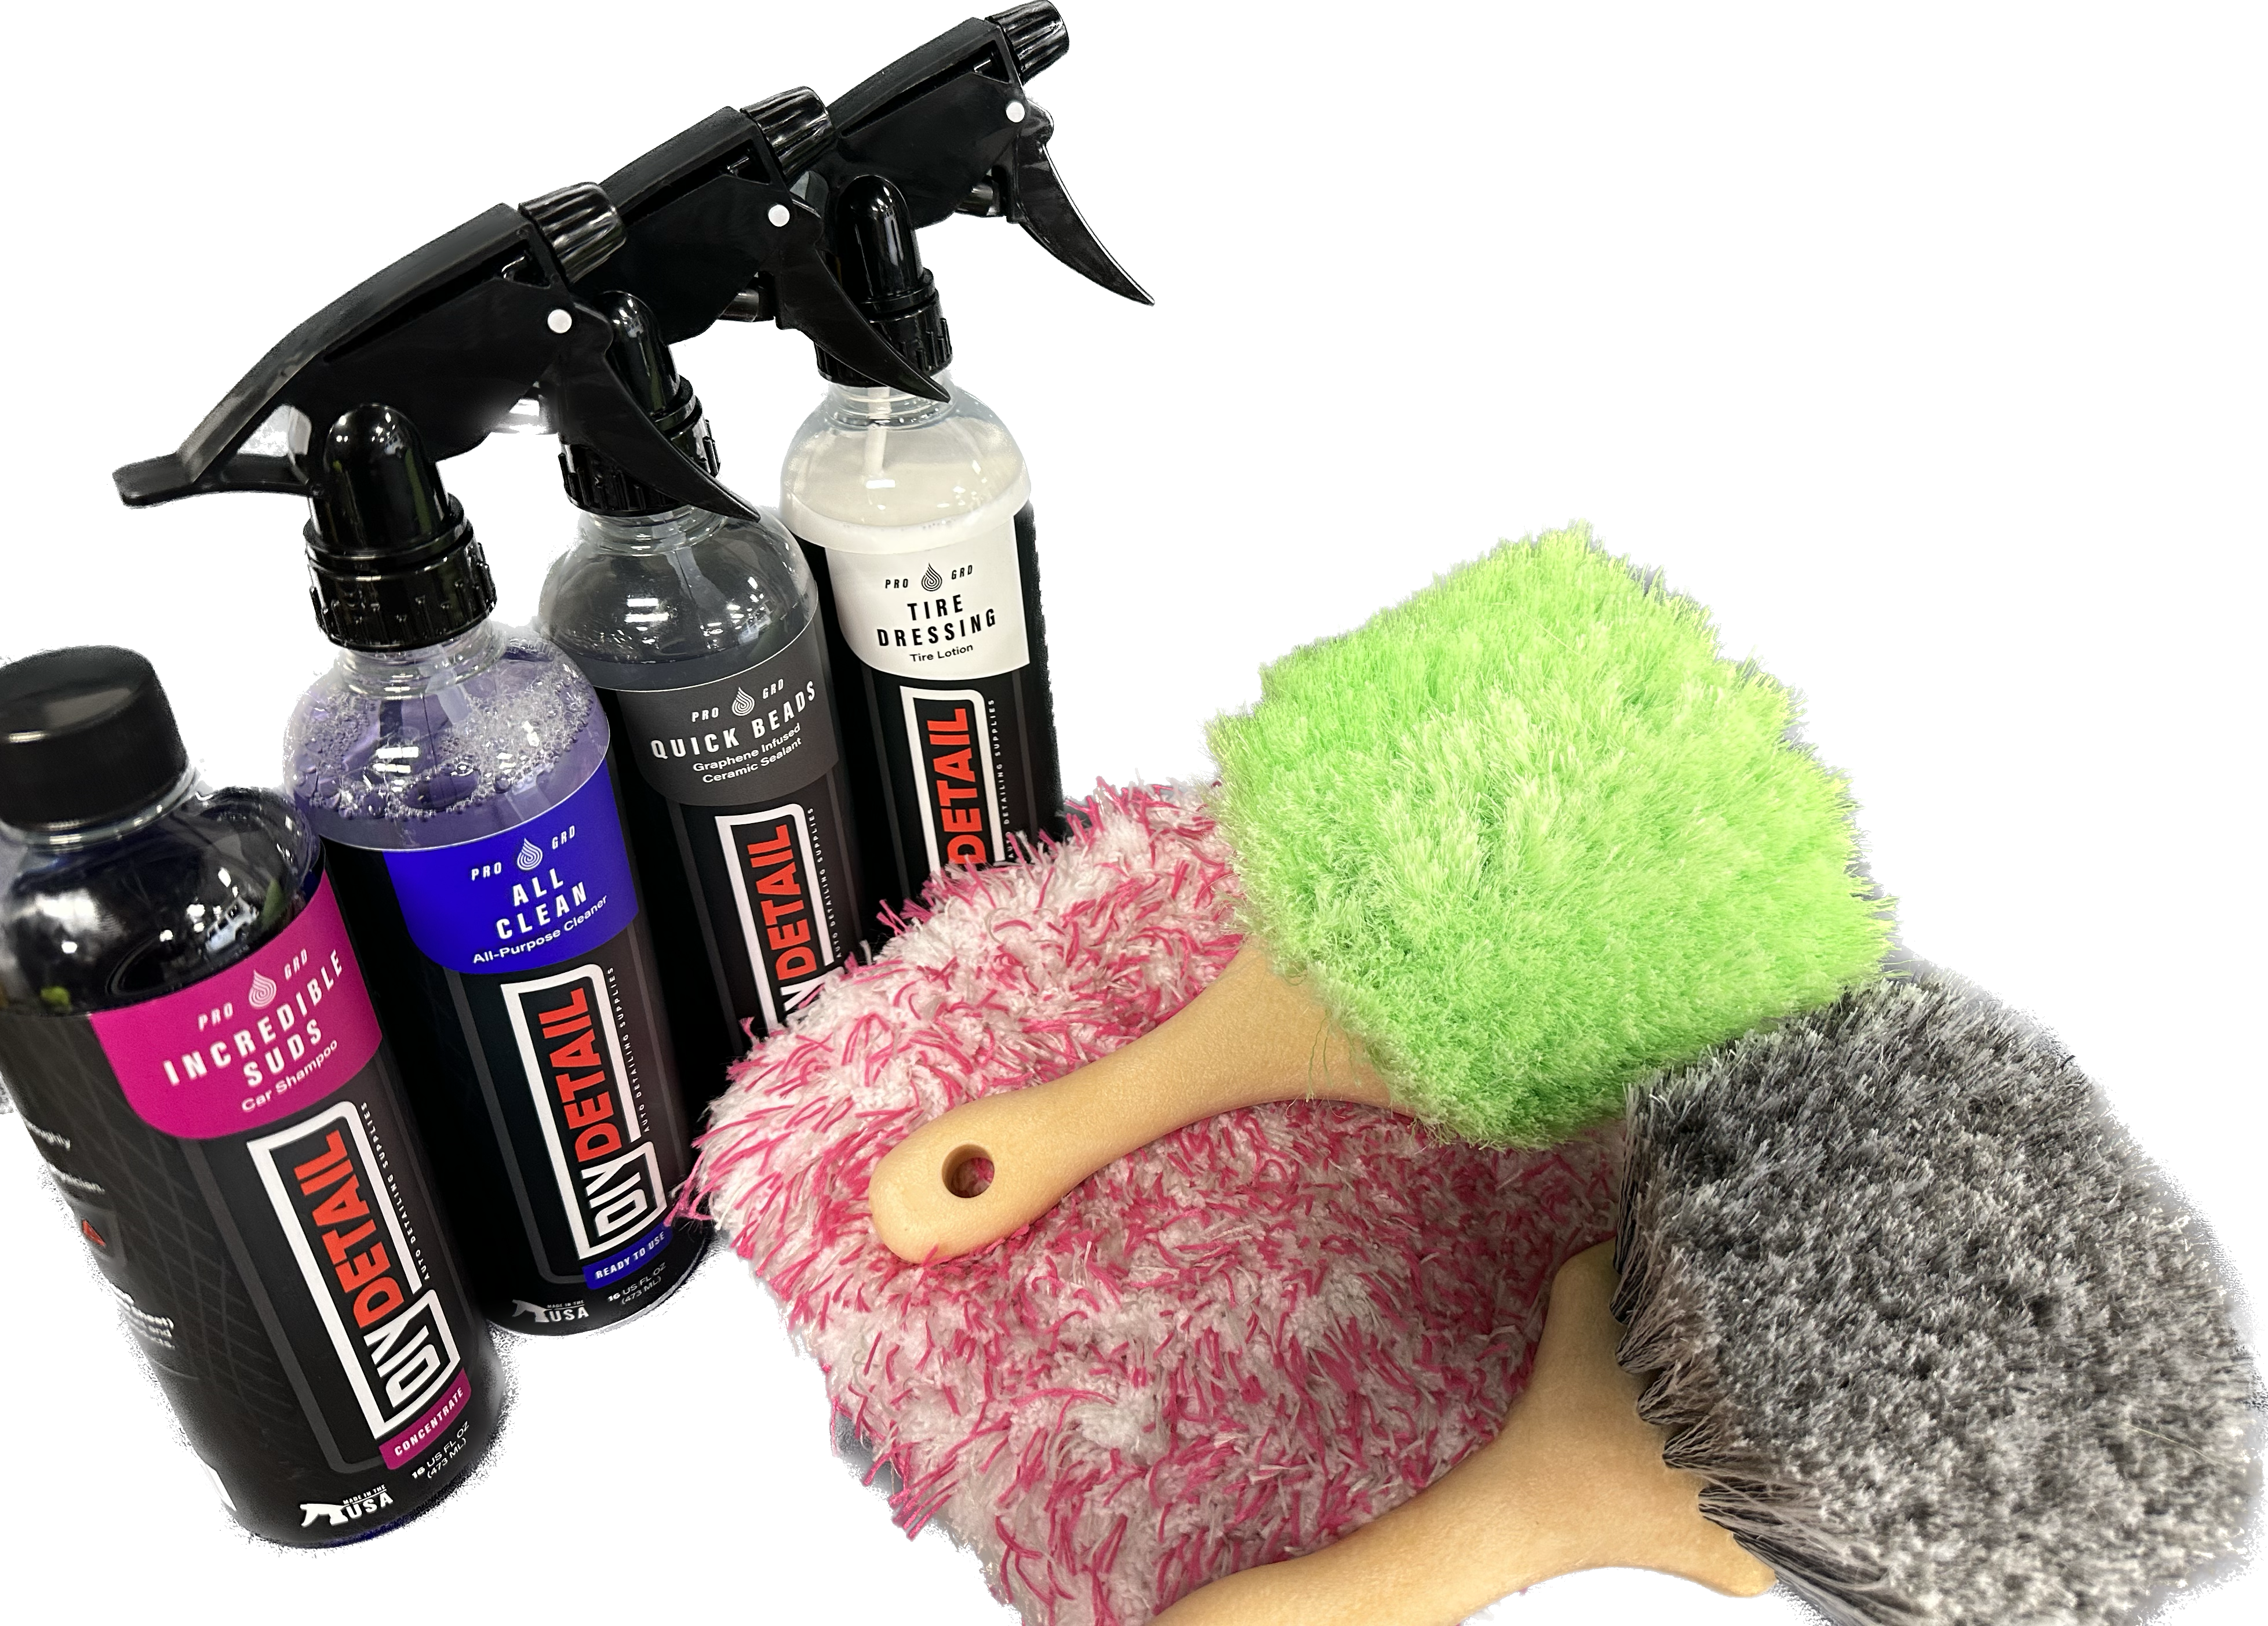 Carbalen Car Care Products Complete DIY Package